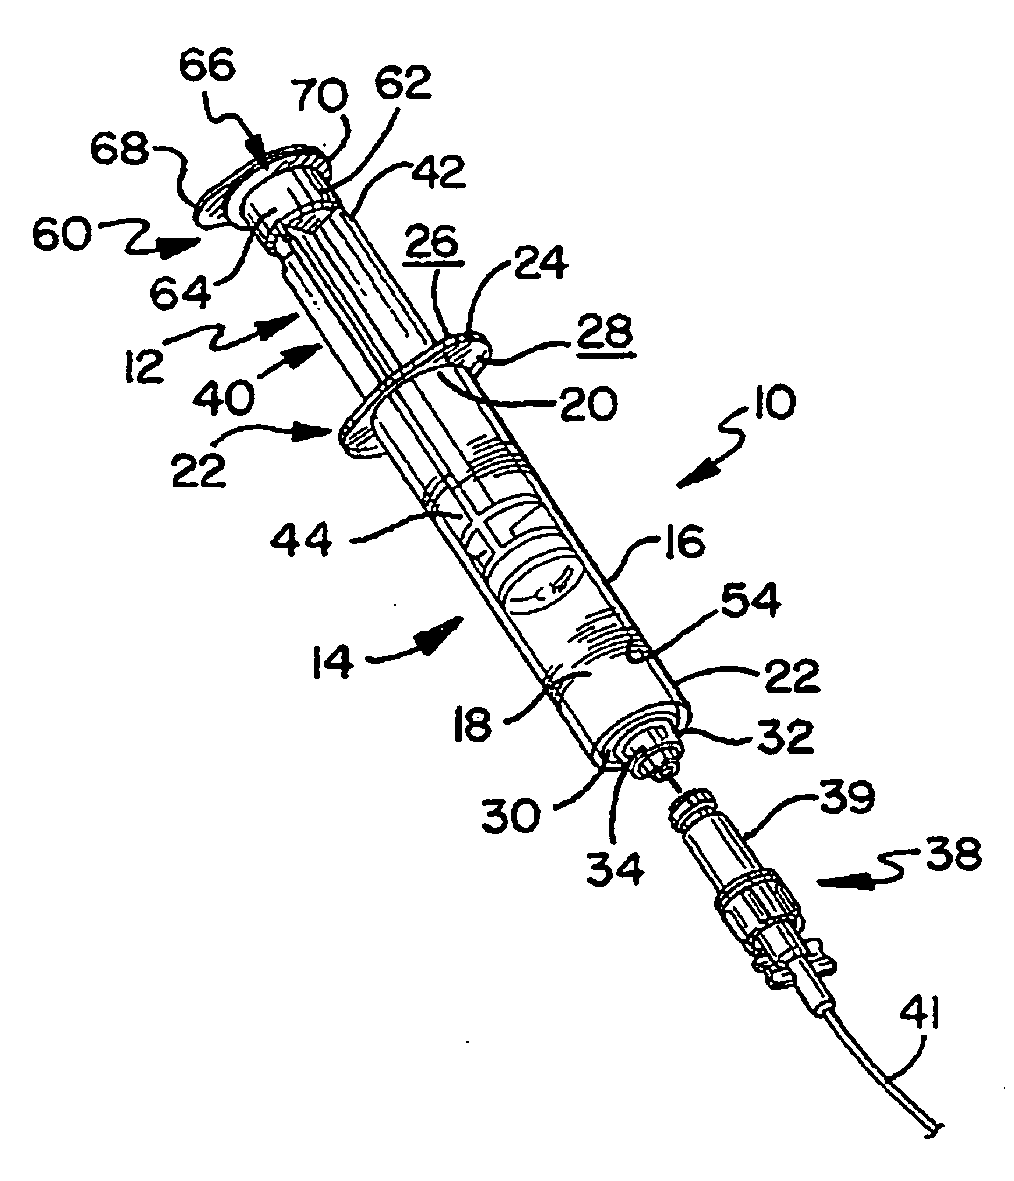 Antiseptic cap and antiseptic cap equipped plunger and syringe barrel assembly